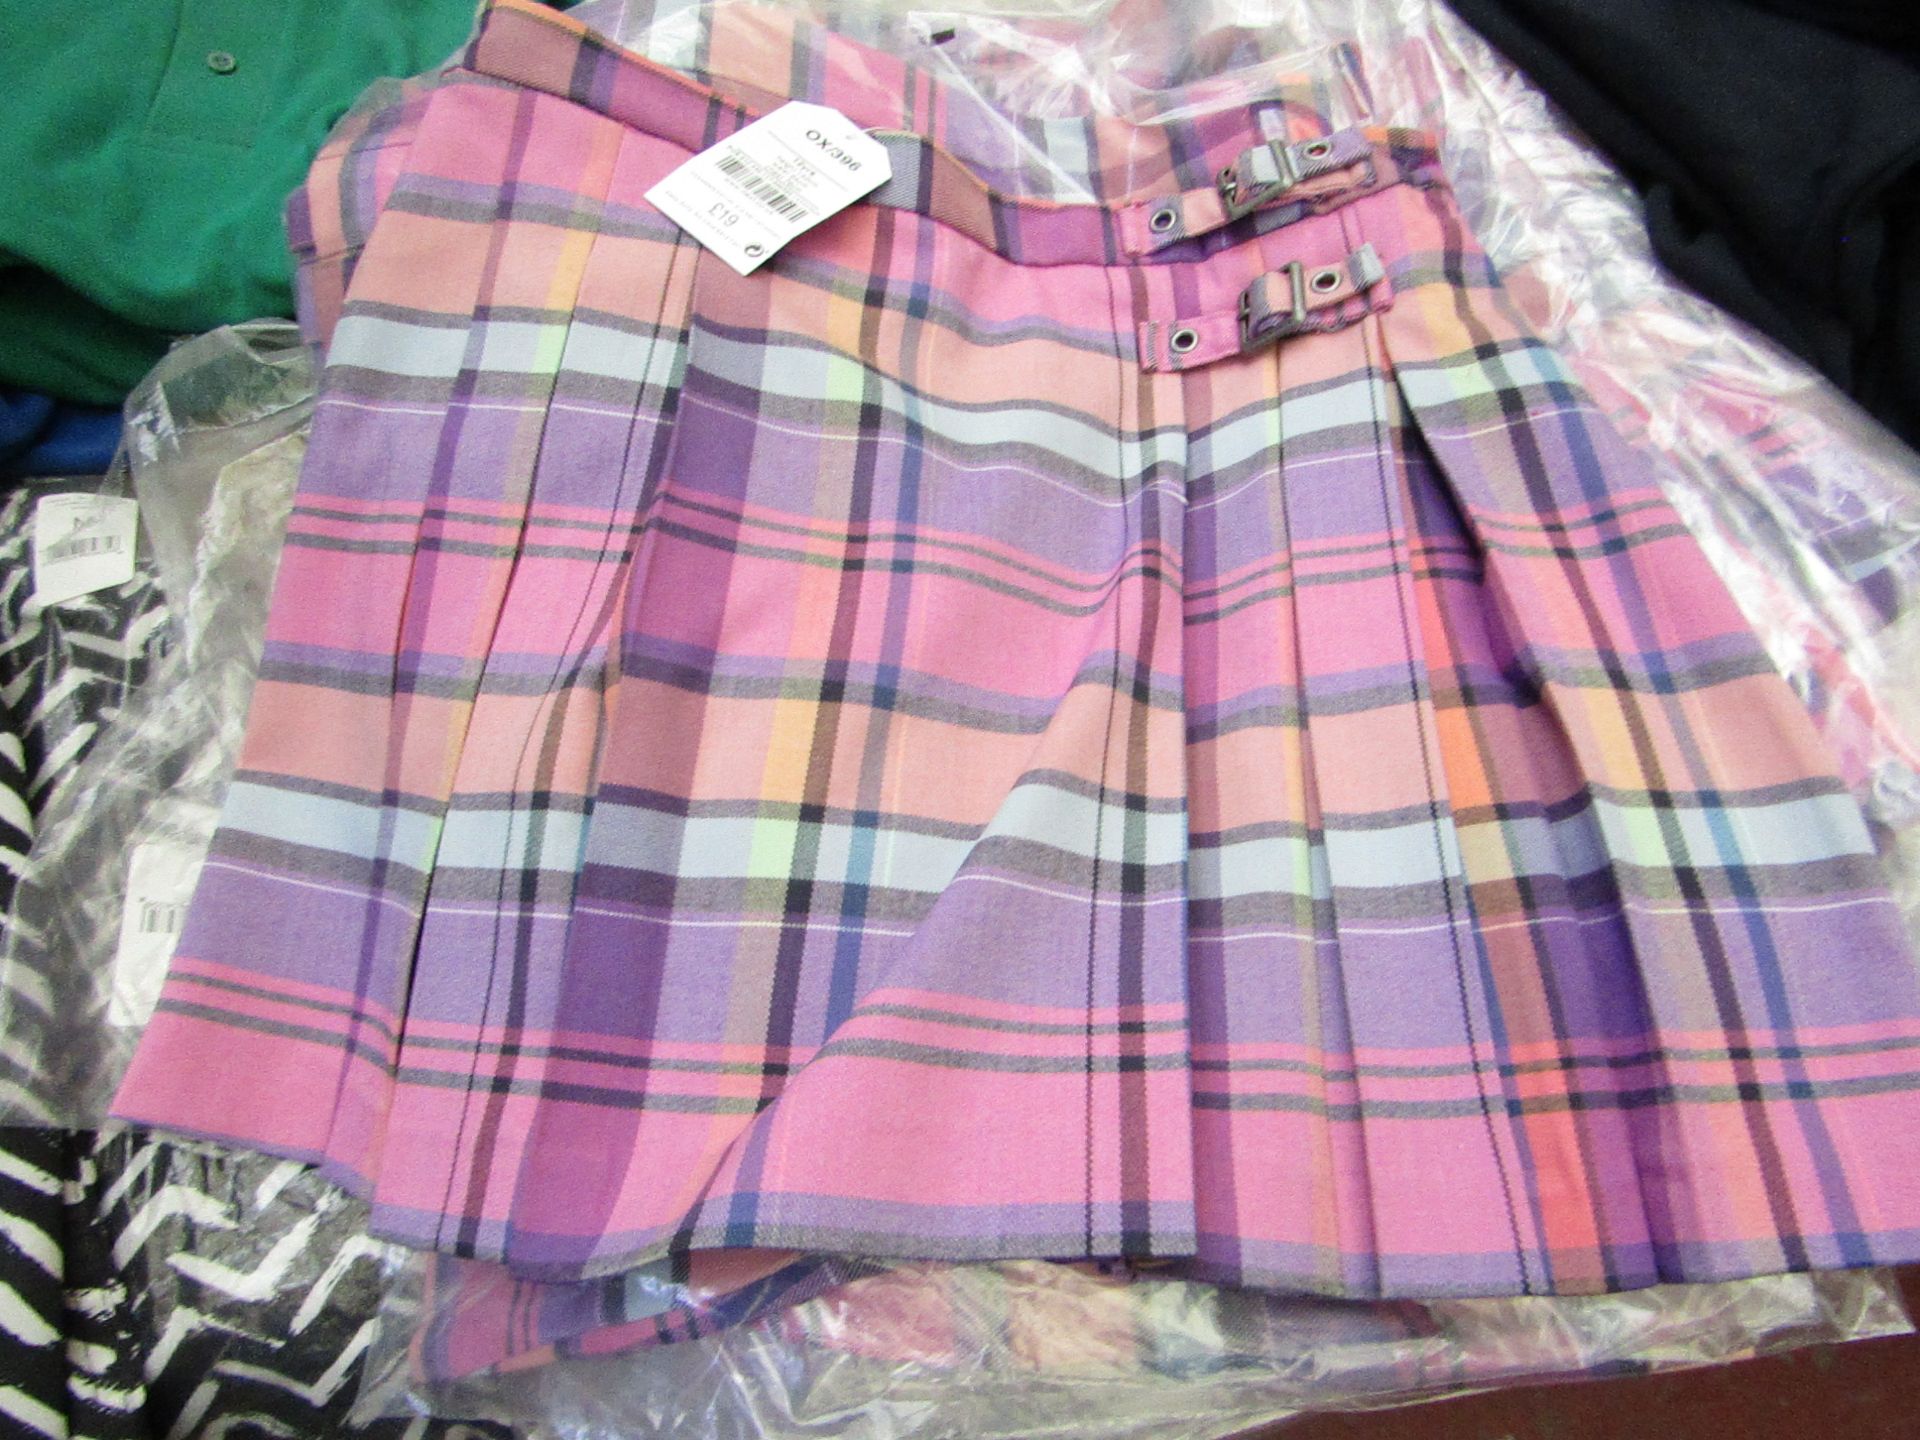 6x Next Girls checked skirts, new, RRp £19, age 12